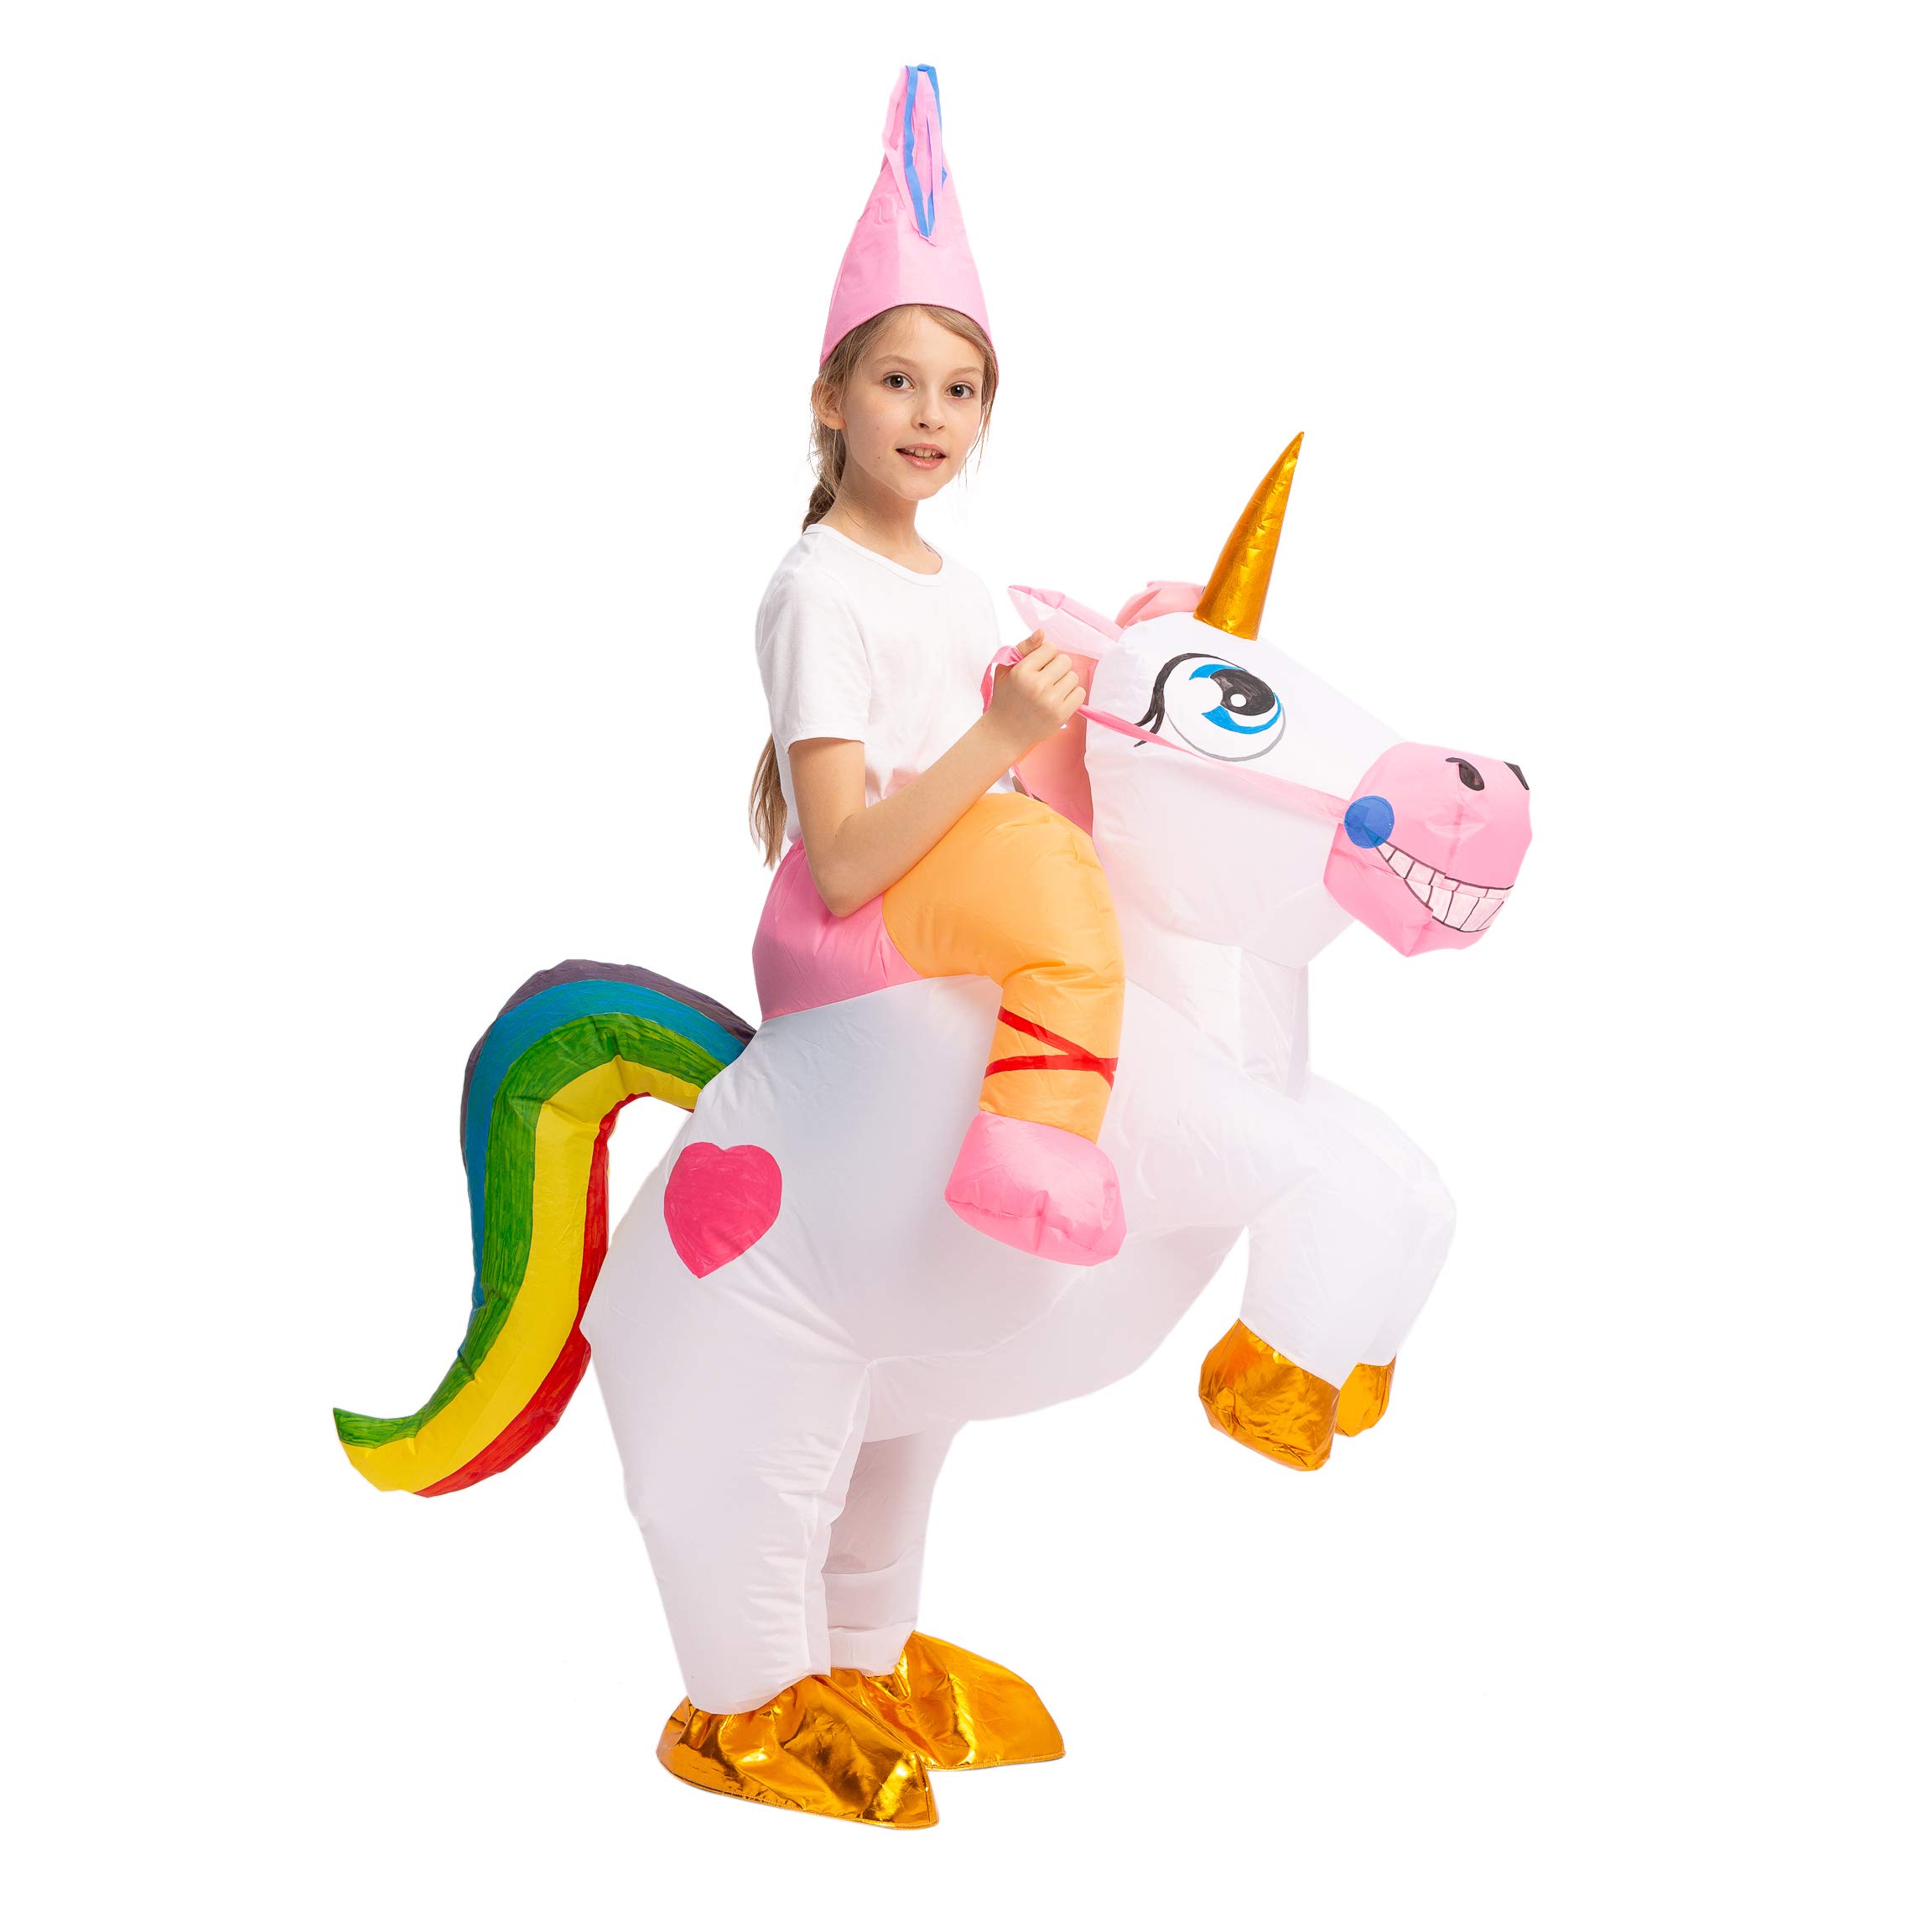 Spooktacular Creations Inflatable Costume Unicorn Riding a Unicorn Air Blow-up Deluxe Halloween Costume